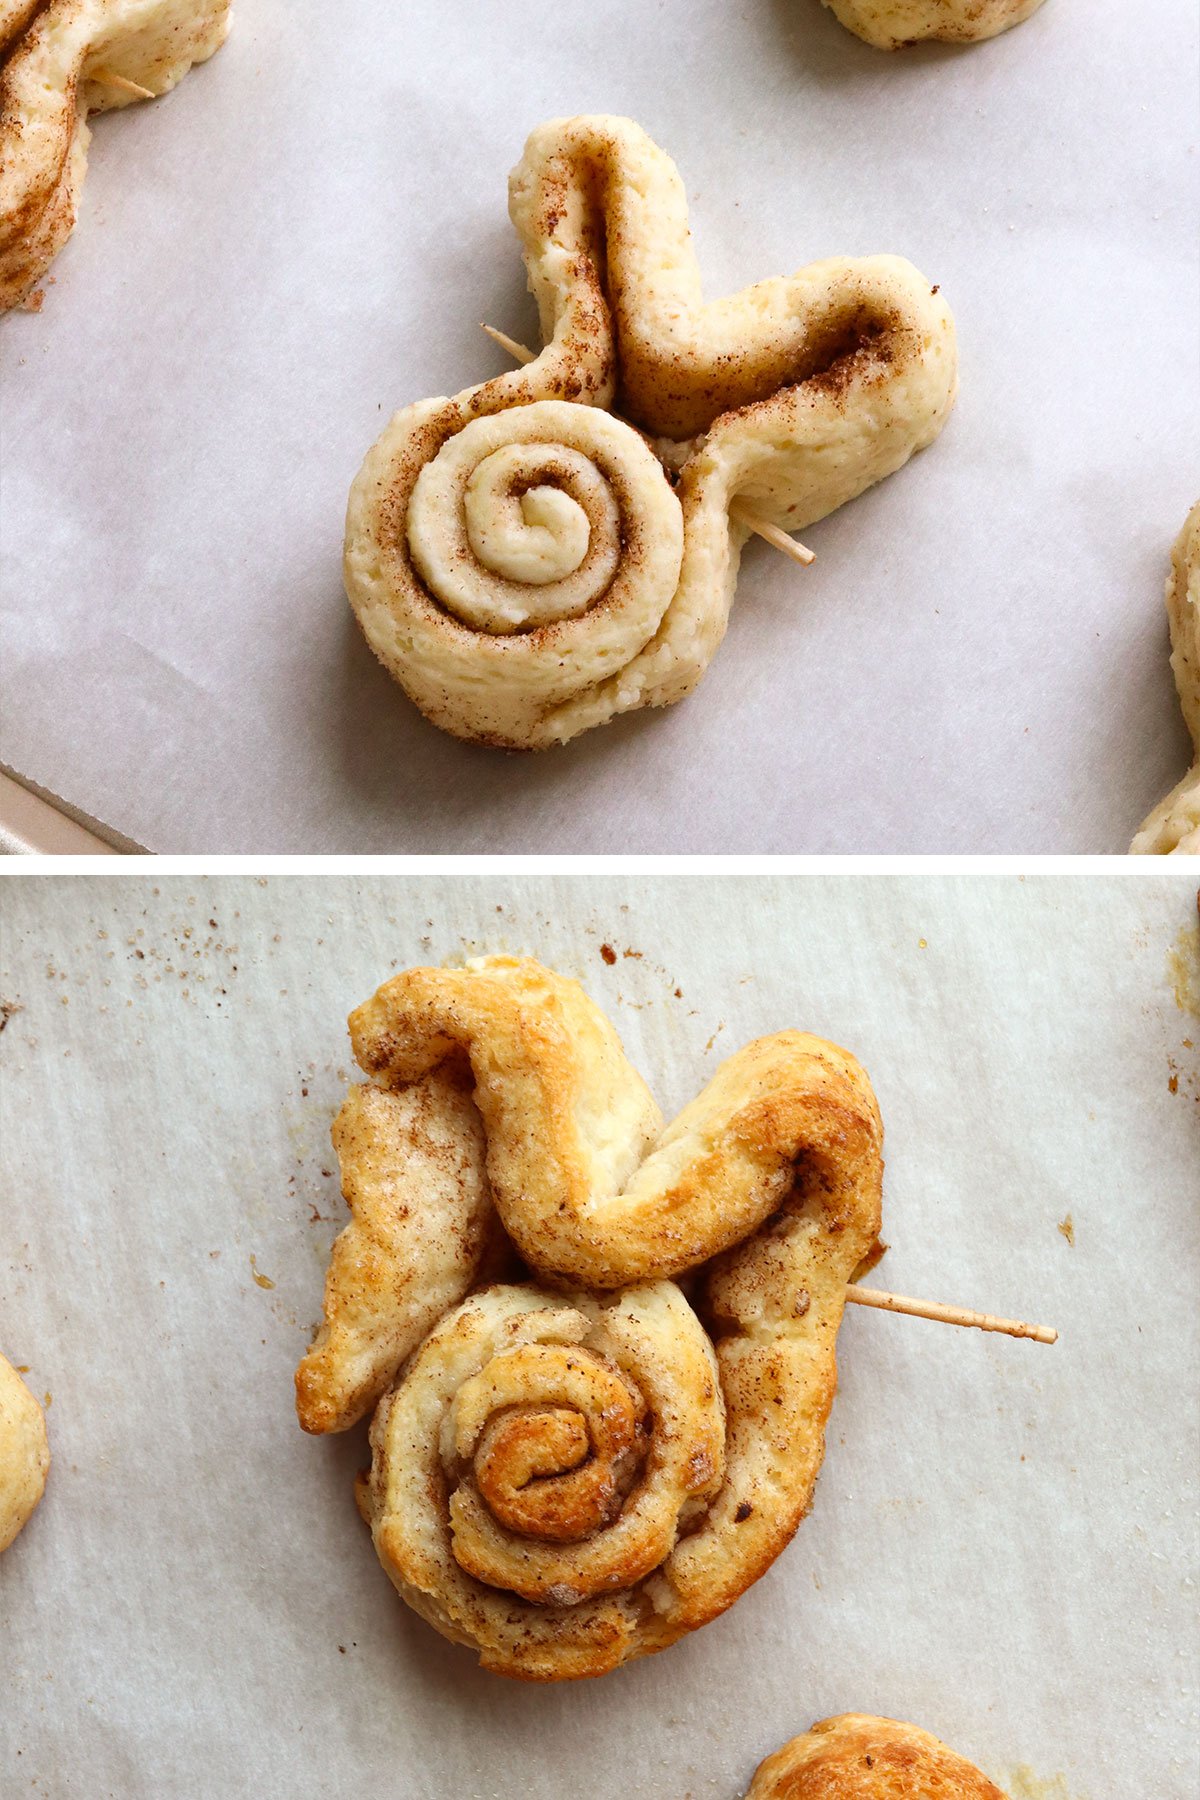 bunny cinnamon rolls on a baking sheet with toothpick to hold them together.